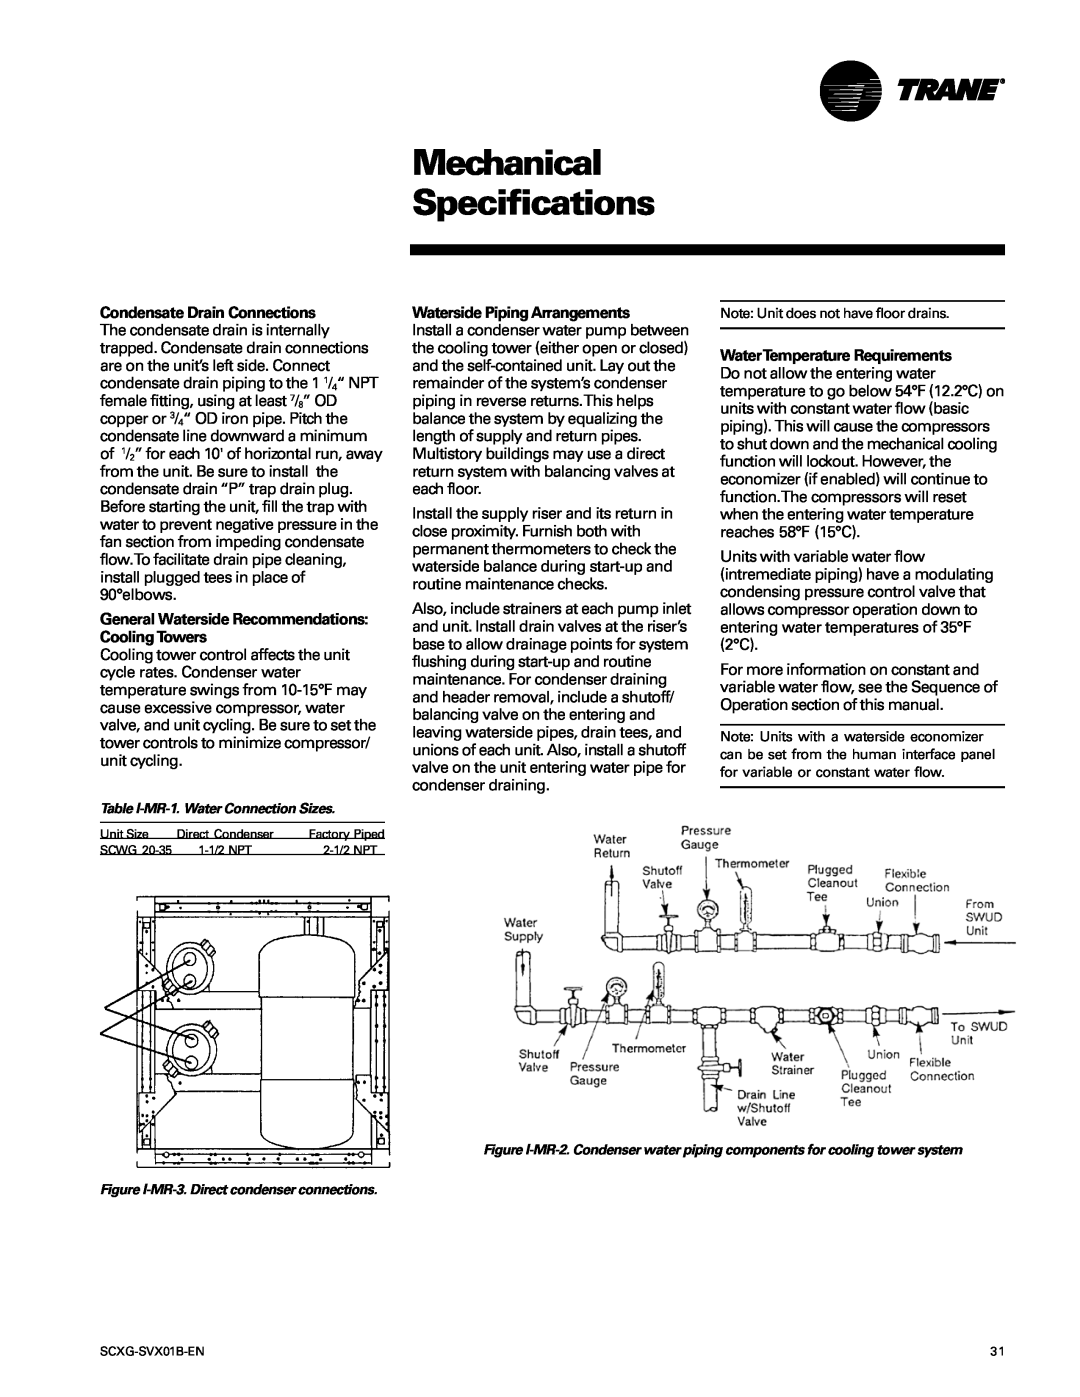 Trane SCXG-SVX01B-EN manual Mechanical Specifications, General Waterside Recommendations Cooling Towers 